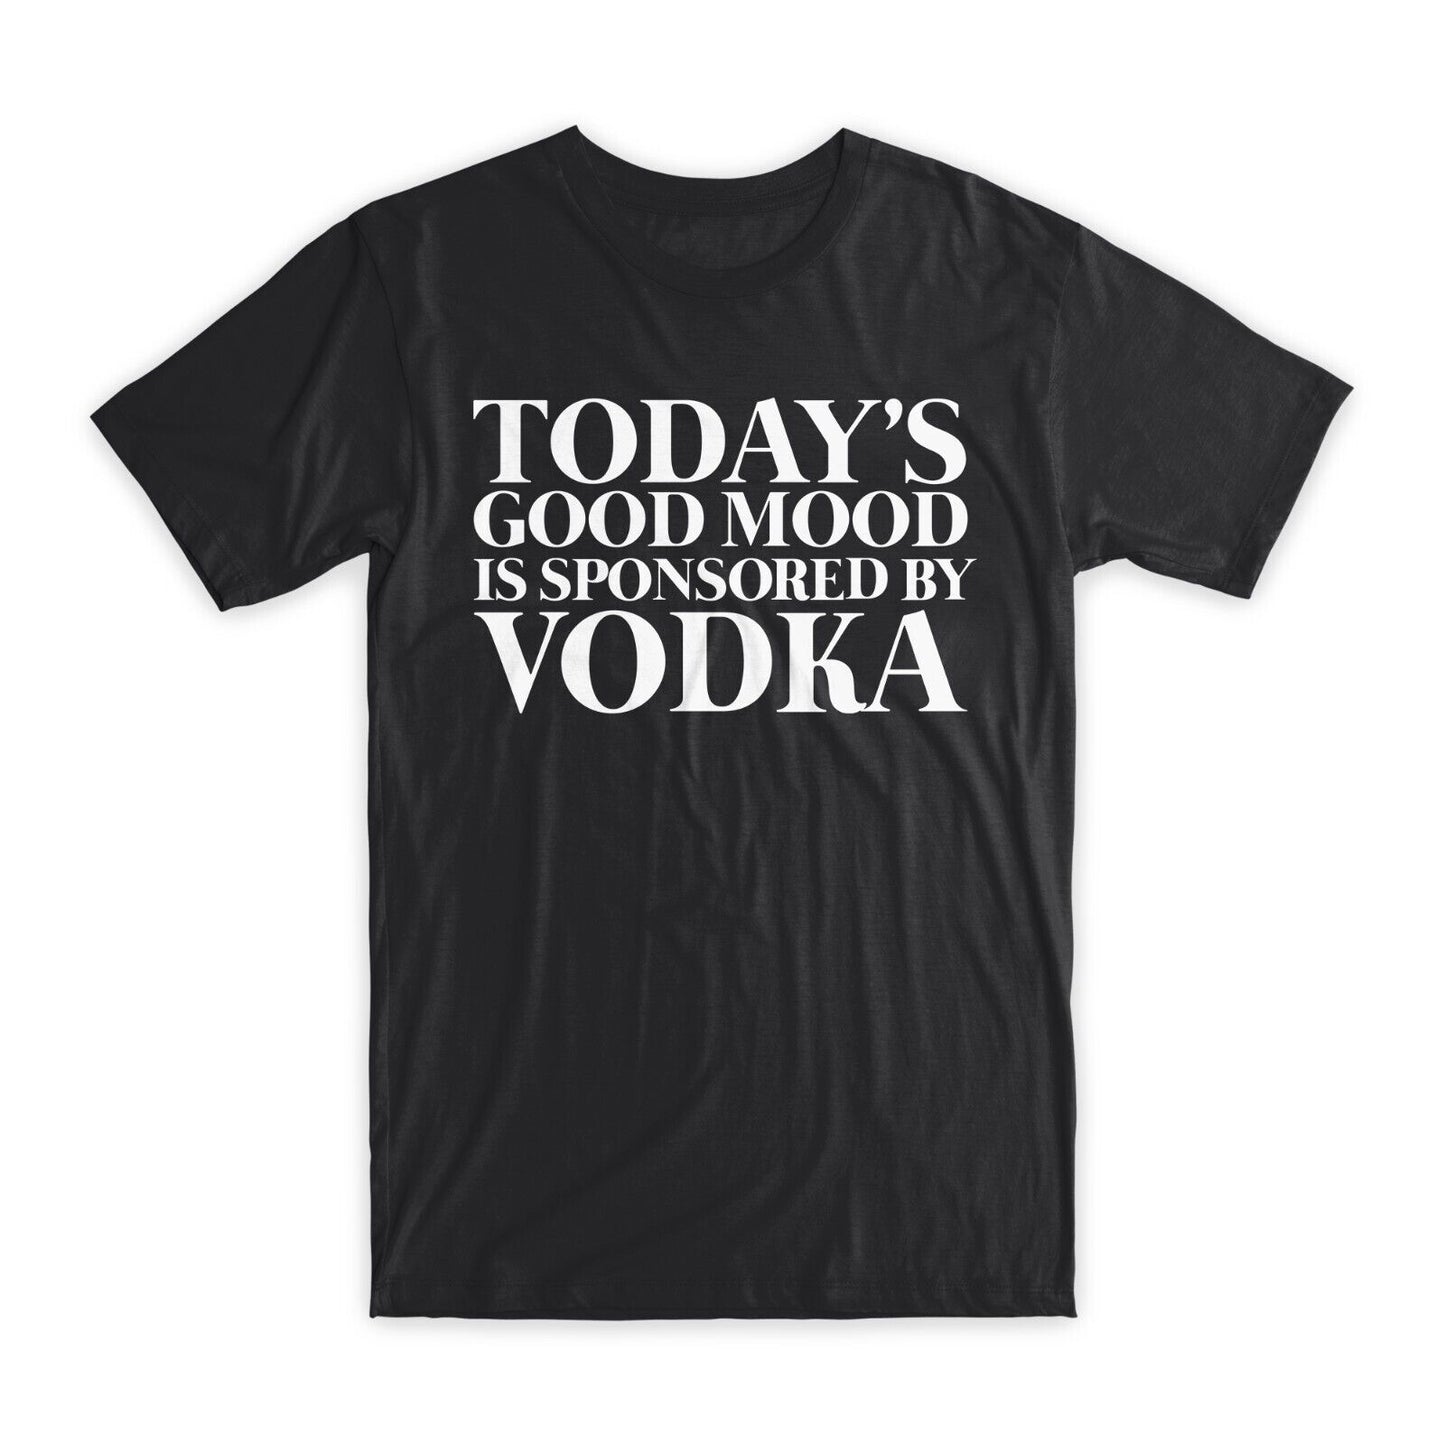 Today's Good Mood is Sponsored By Vodka T-Shirt Premium Cotton Funny T Gift NEW